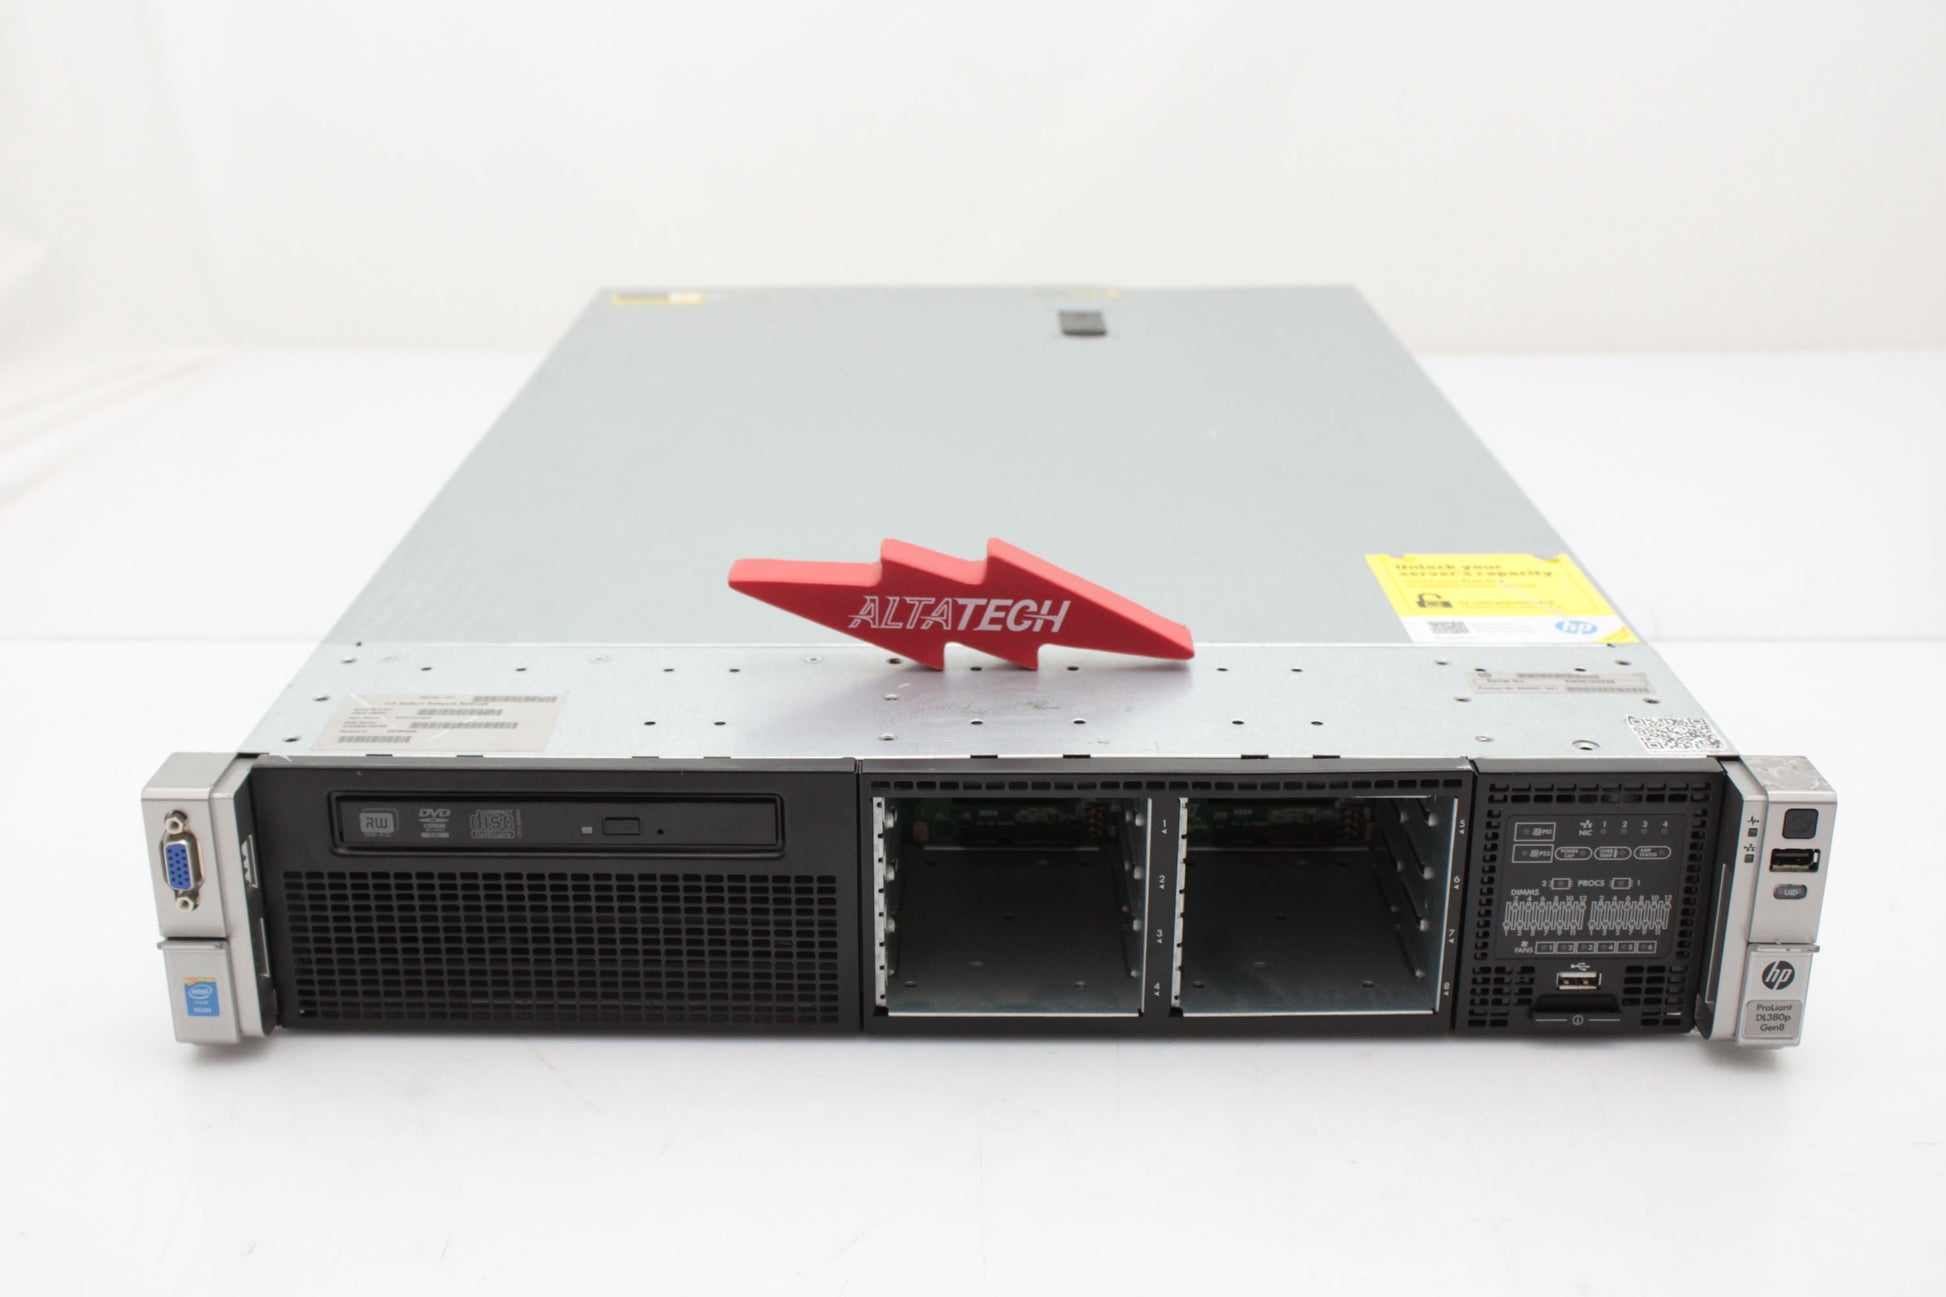 HP 653200-B21 DL380p G8 2U Server Chassis - Configure to Order, Used